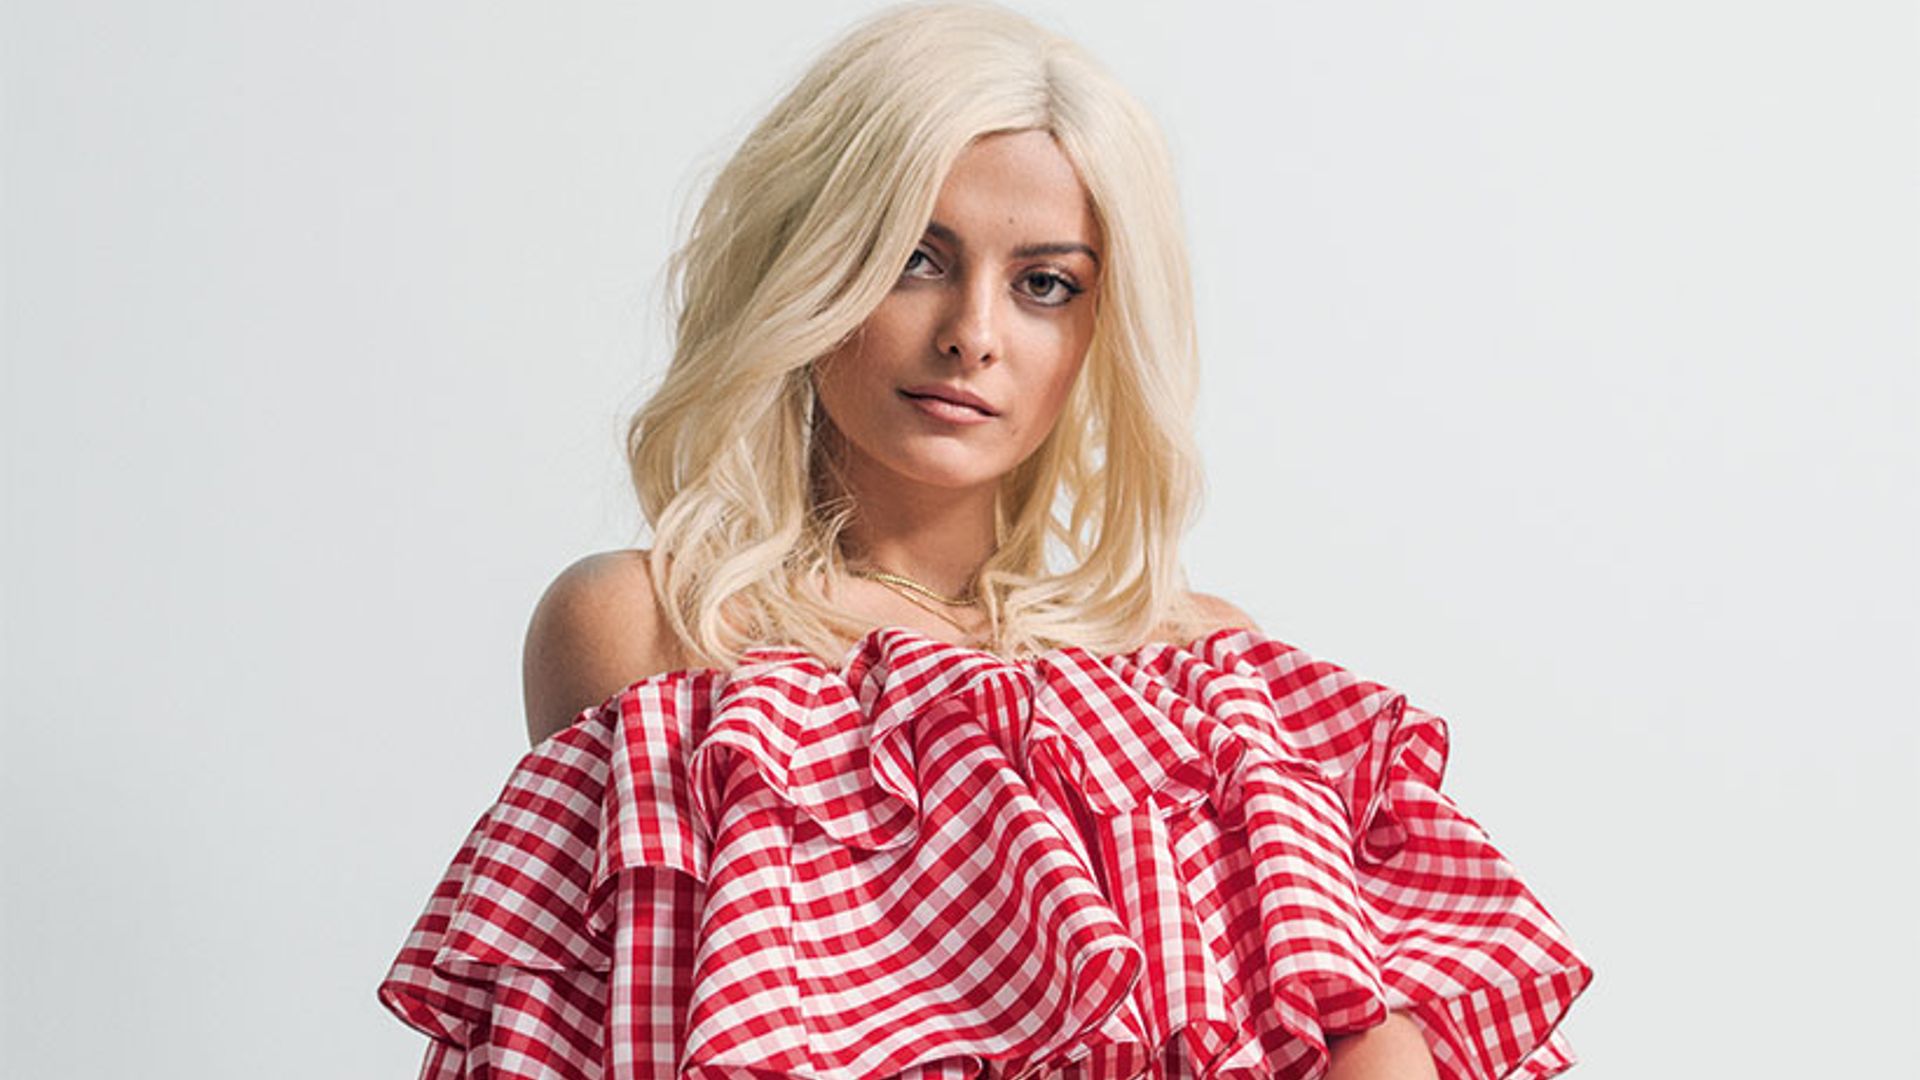 Bebe Rexha reveals all about her career-defining year to HFM